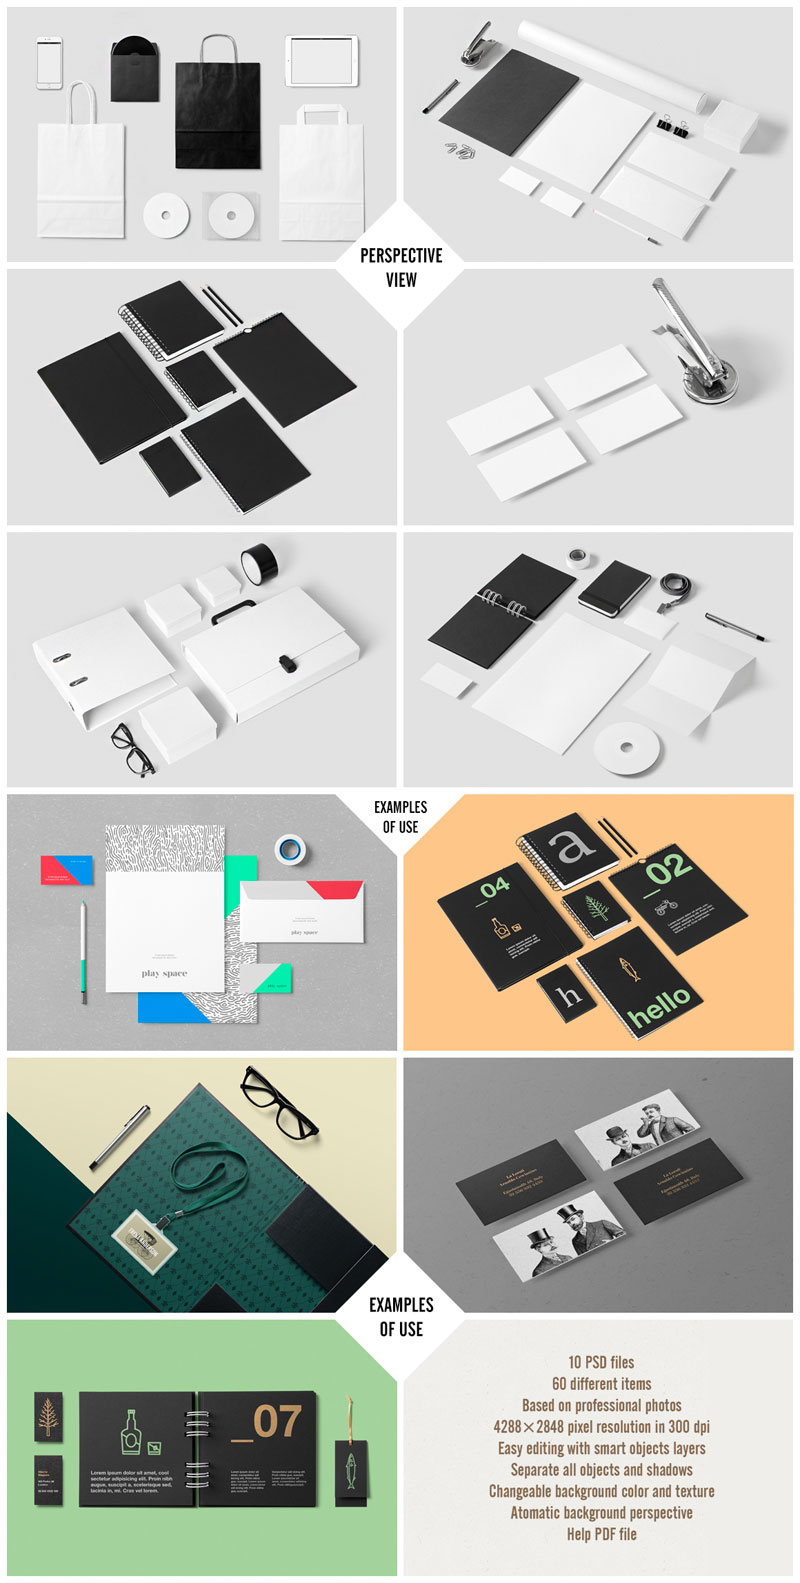 The corporate stationery mock-up set by forgraphic™ - Perspective view and examples of use.